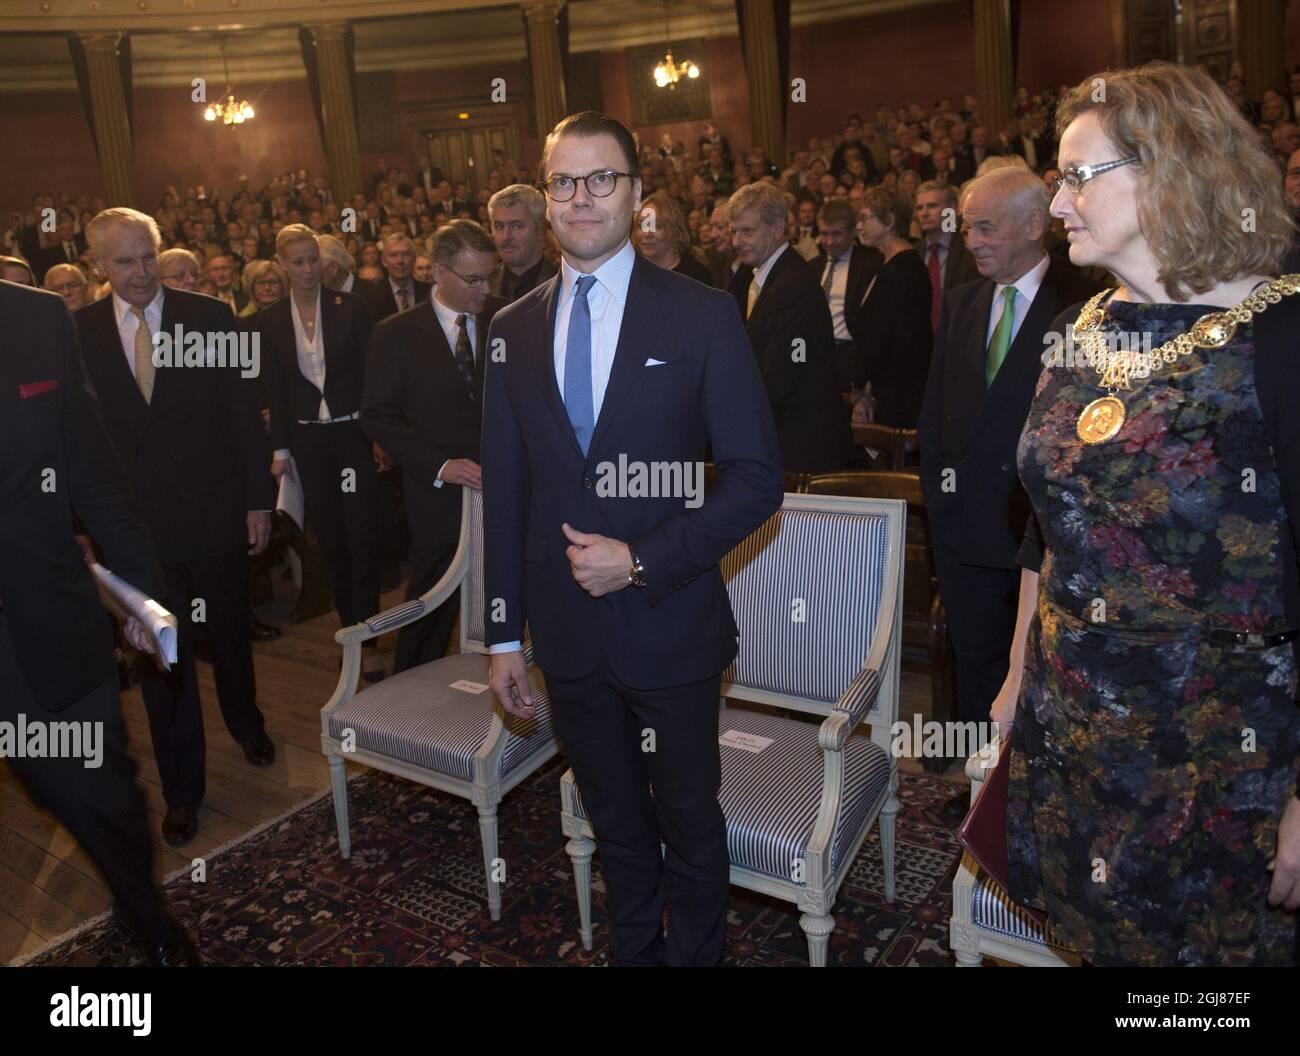 UPPSALA 2013-11-06 Prince Daniel is seen attending the Anders Wall entrepreneurship lecture in the Uppsala University in Uppsala, Sweden. November 6, 2012. At left industrialist Anders Wall and at right University Vice-chancellor Eva Akesson. Foto: Fredrik Sandberg / TT / Kod 10080  Stock Photo